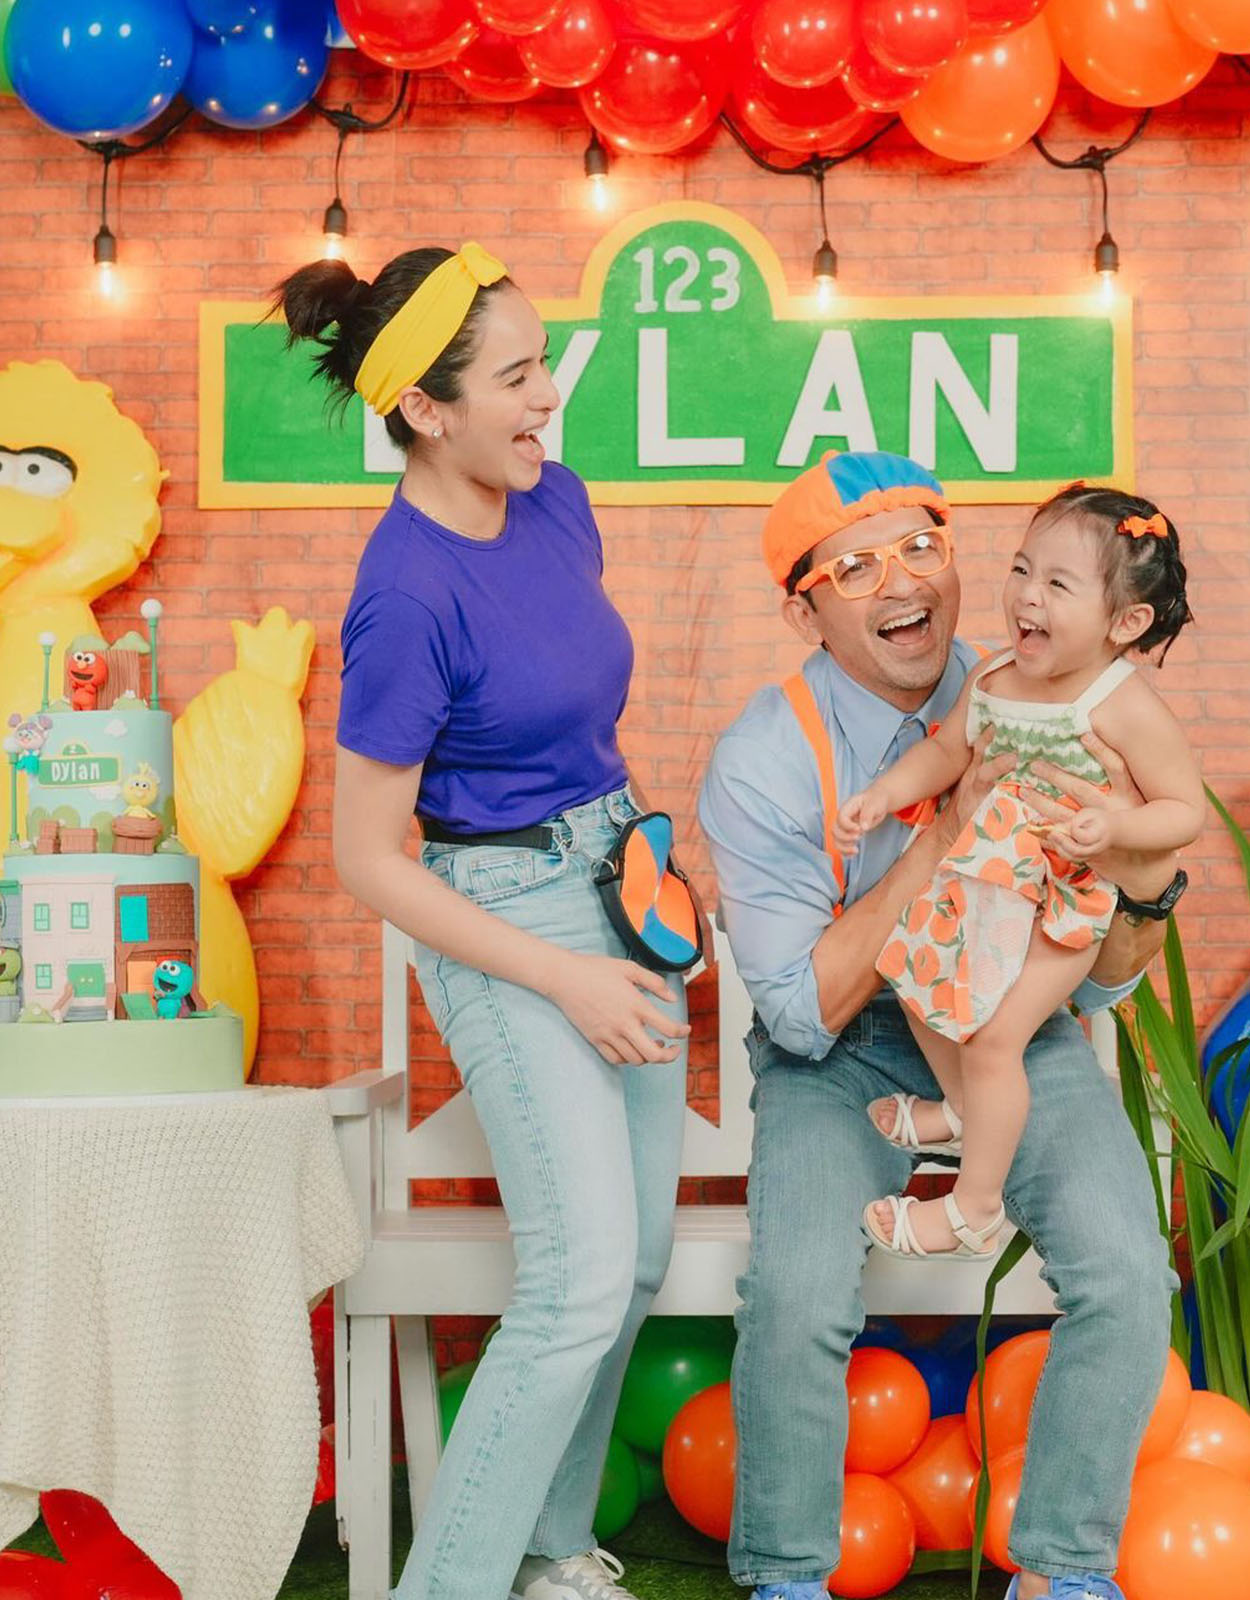 Jennylyn Mercado and Dennis Trillo dressed up as Blippi and Meekah for daughter Dylan's birthday